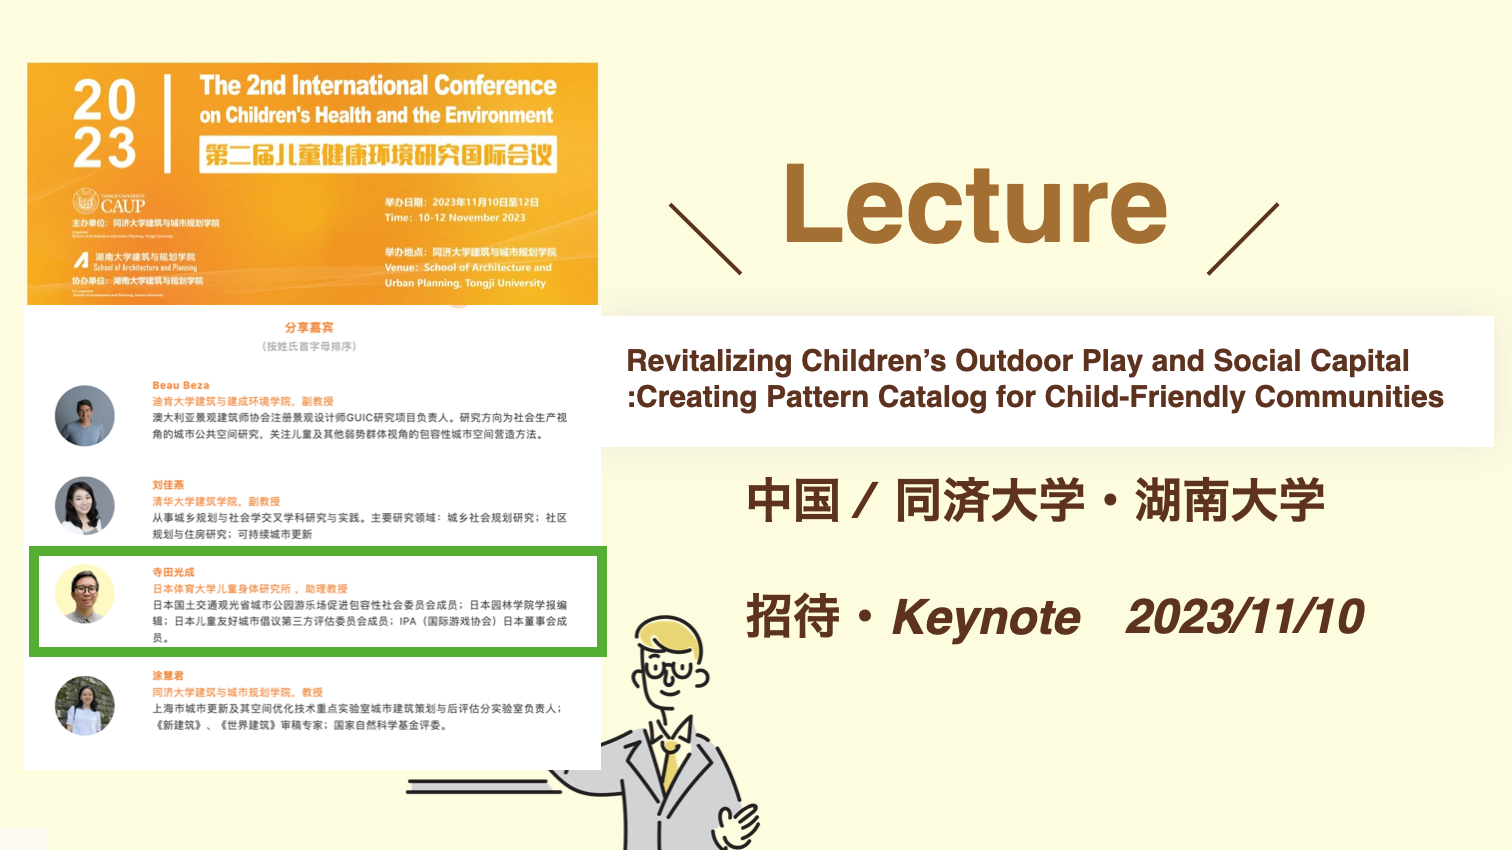 【Keynote】The 2nd International Conference on Children’s Health and the Environment